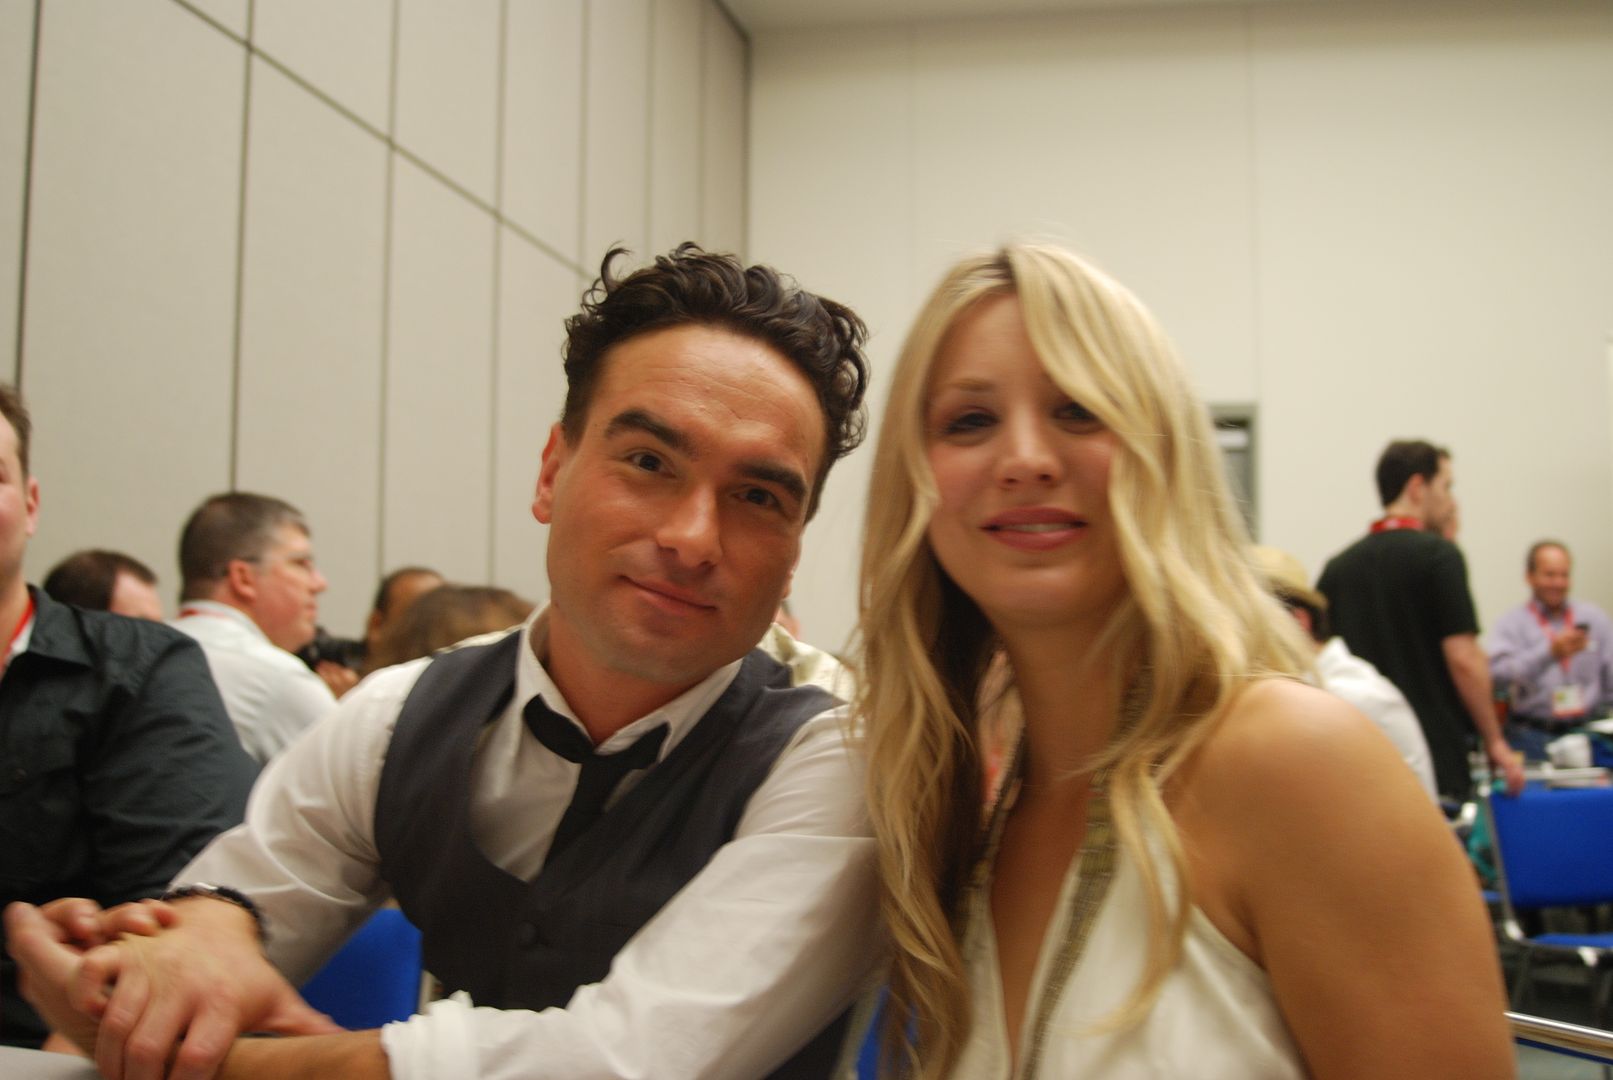 Johnny Galecki and Kaley Cuoco in the press room at ComicCon